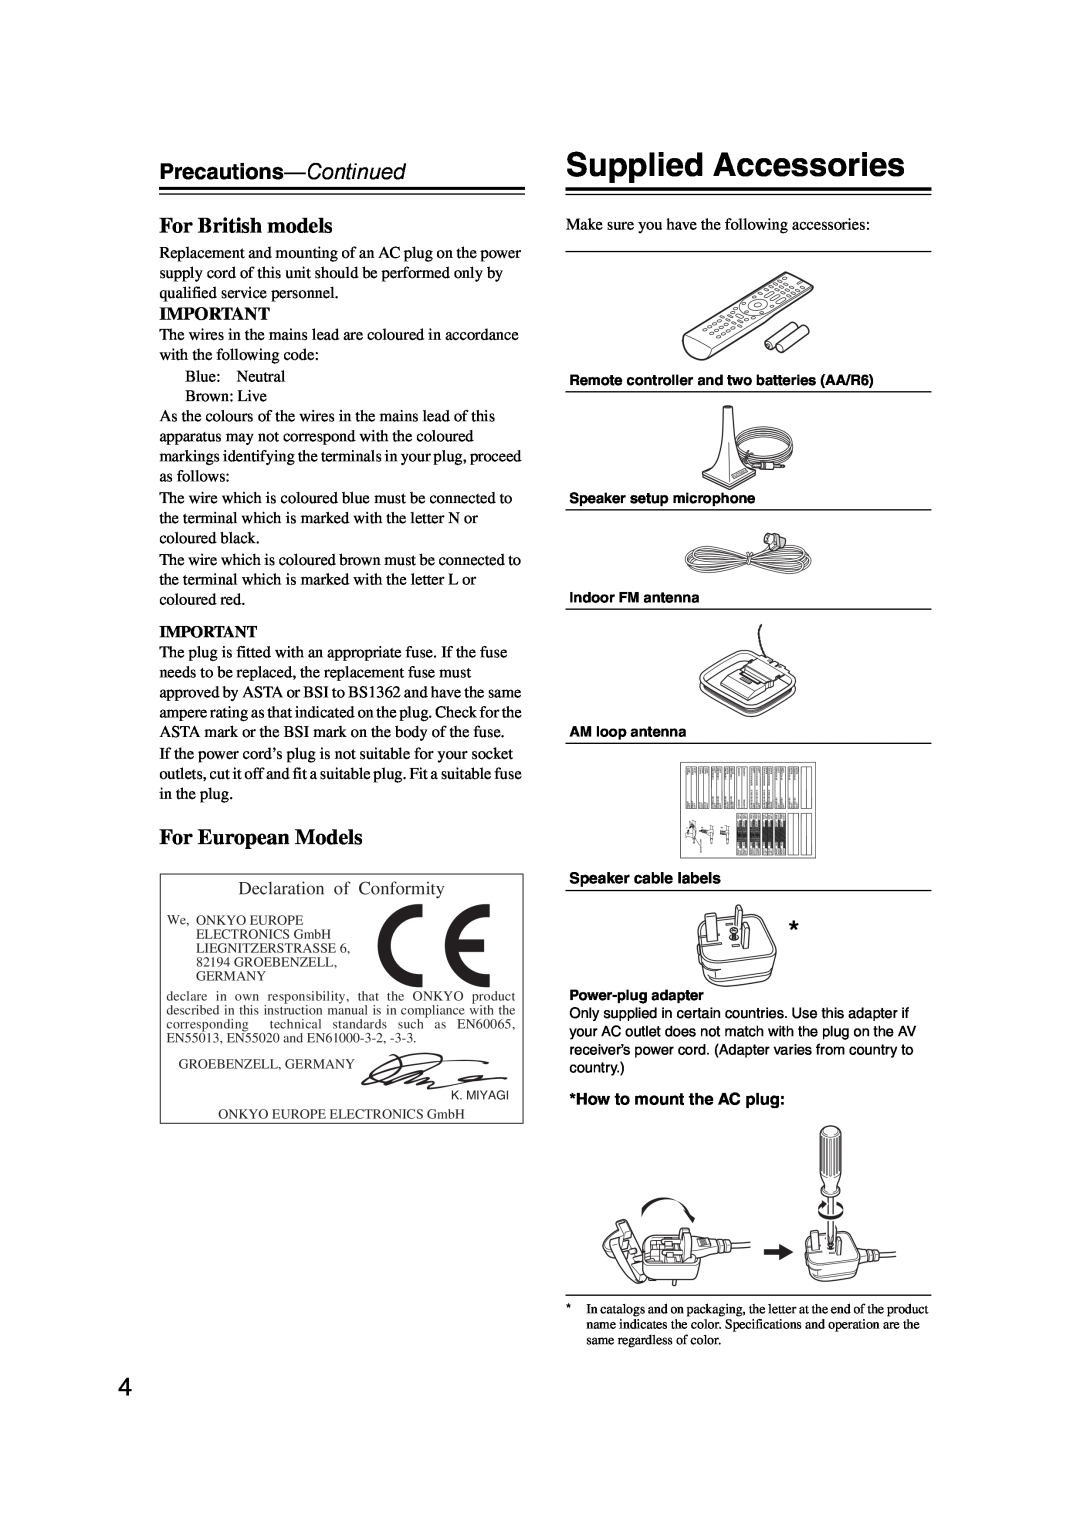 Onkyo TXSR307 instruction manual Supplied Accessories, Precautions-Continued, For British models, For European Models 